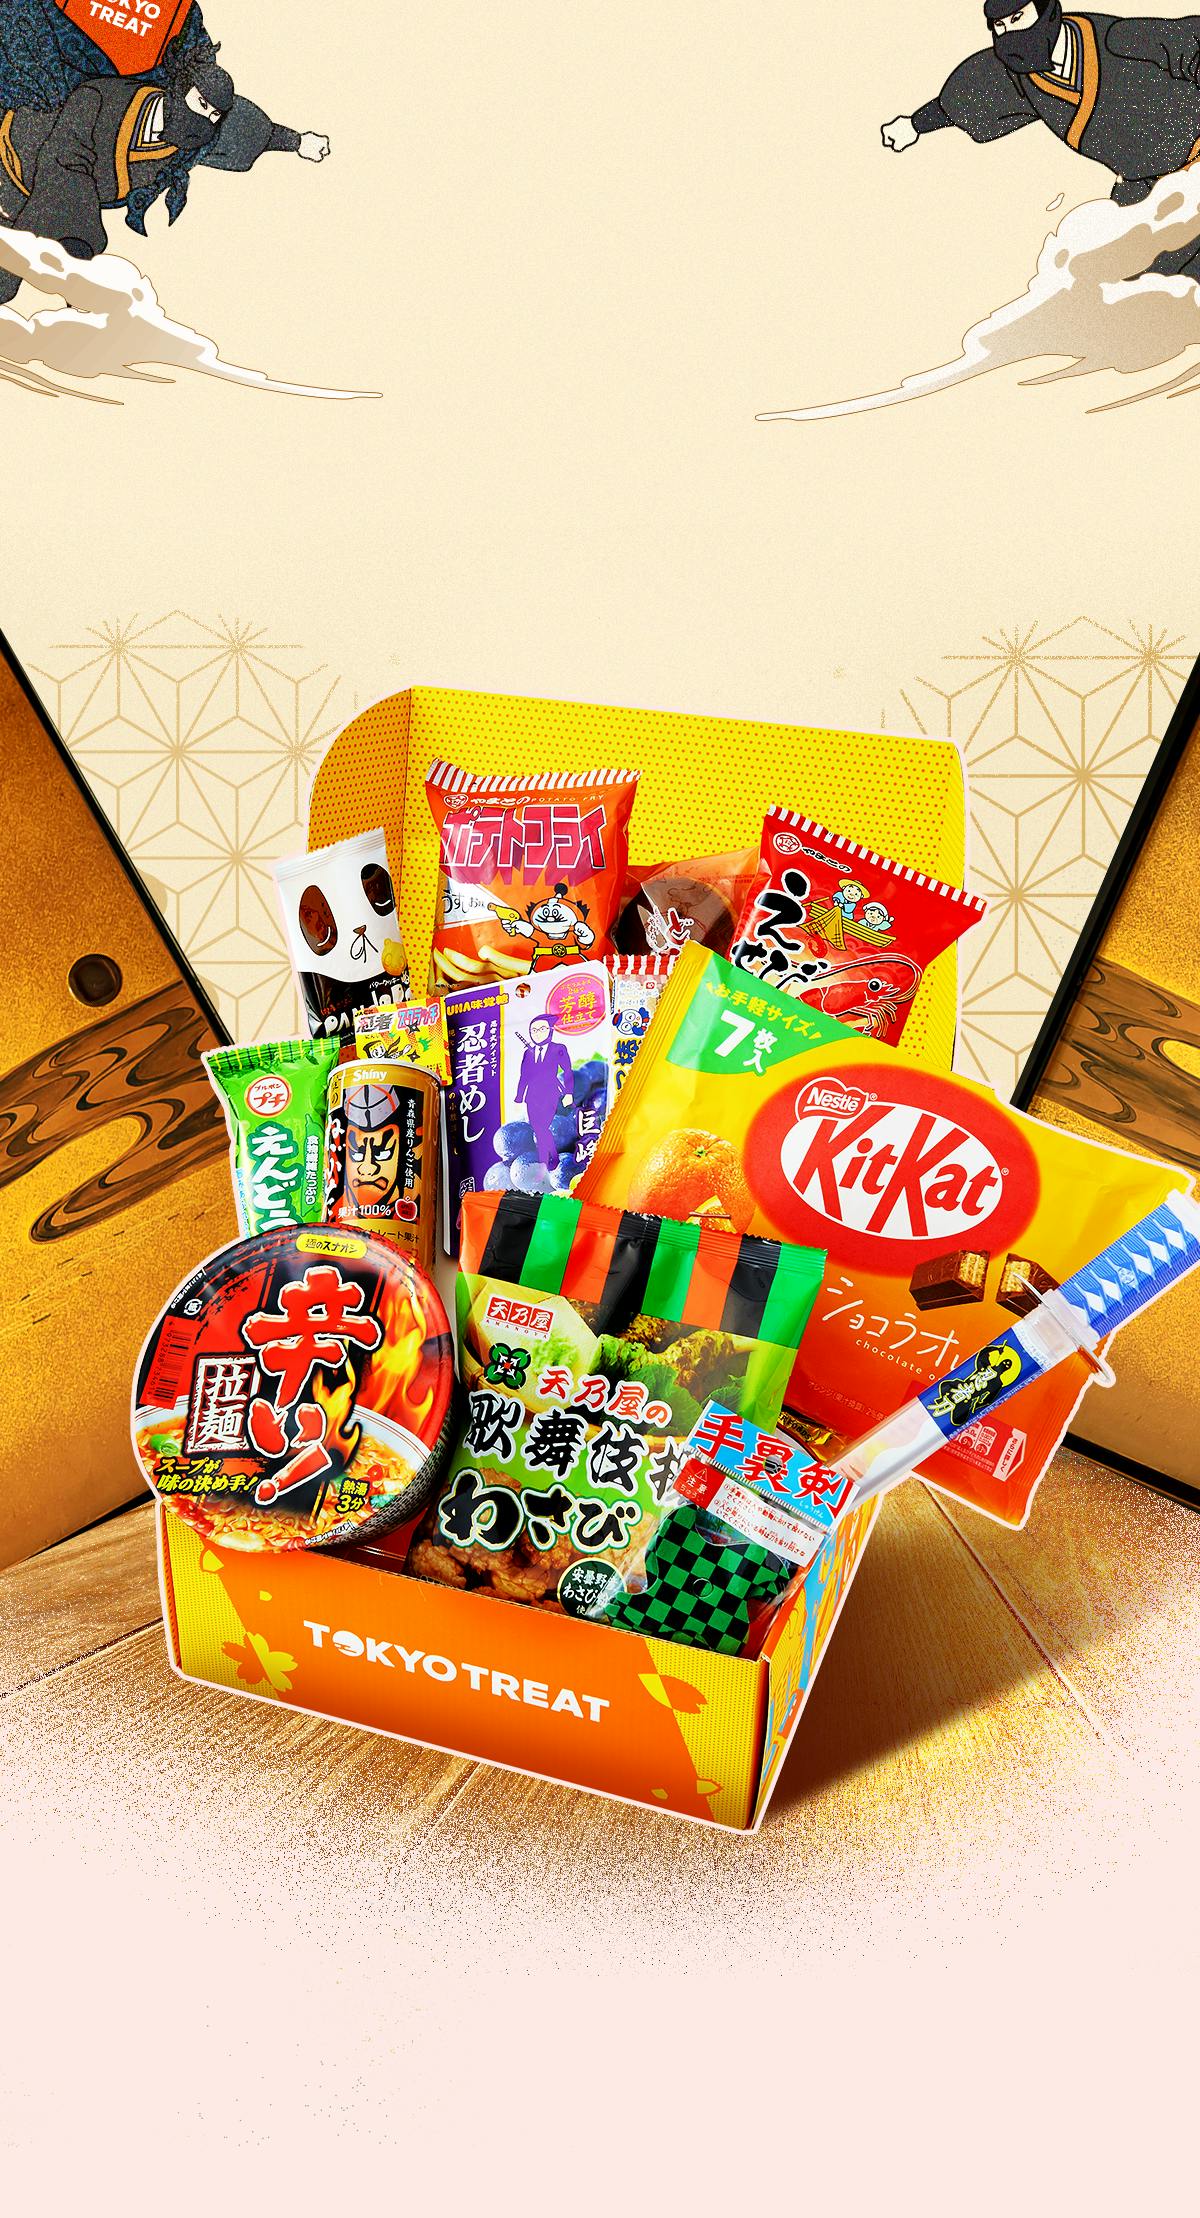 The TokyoTreat box sits in an ancient Japanese house, surrounded by ninjas and other ninja-inspired motifs.